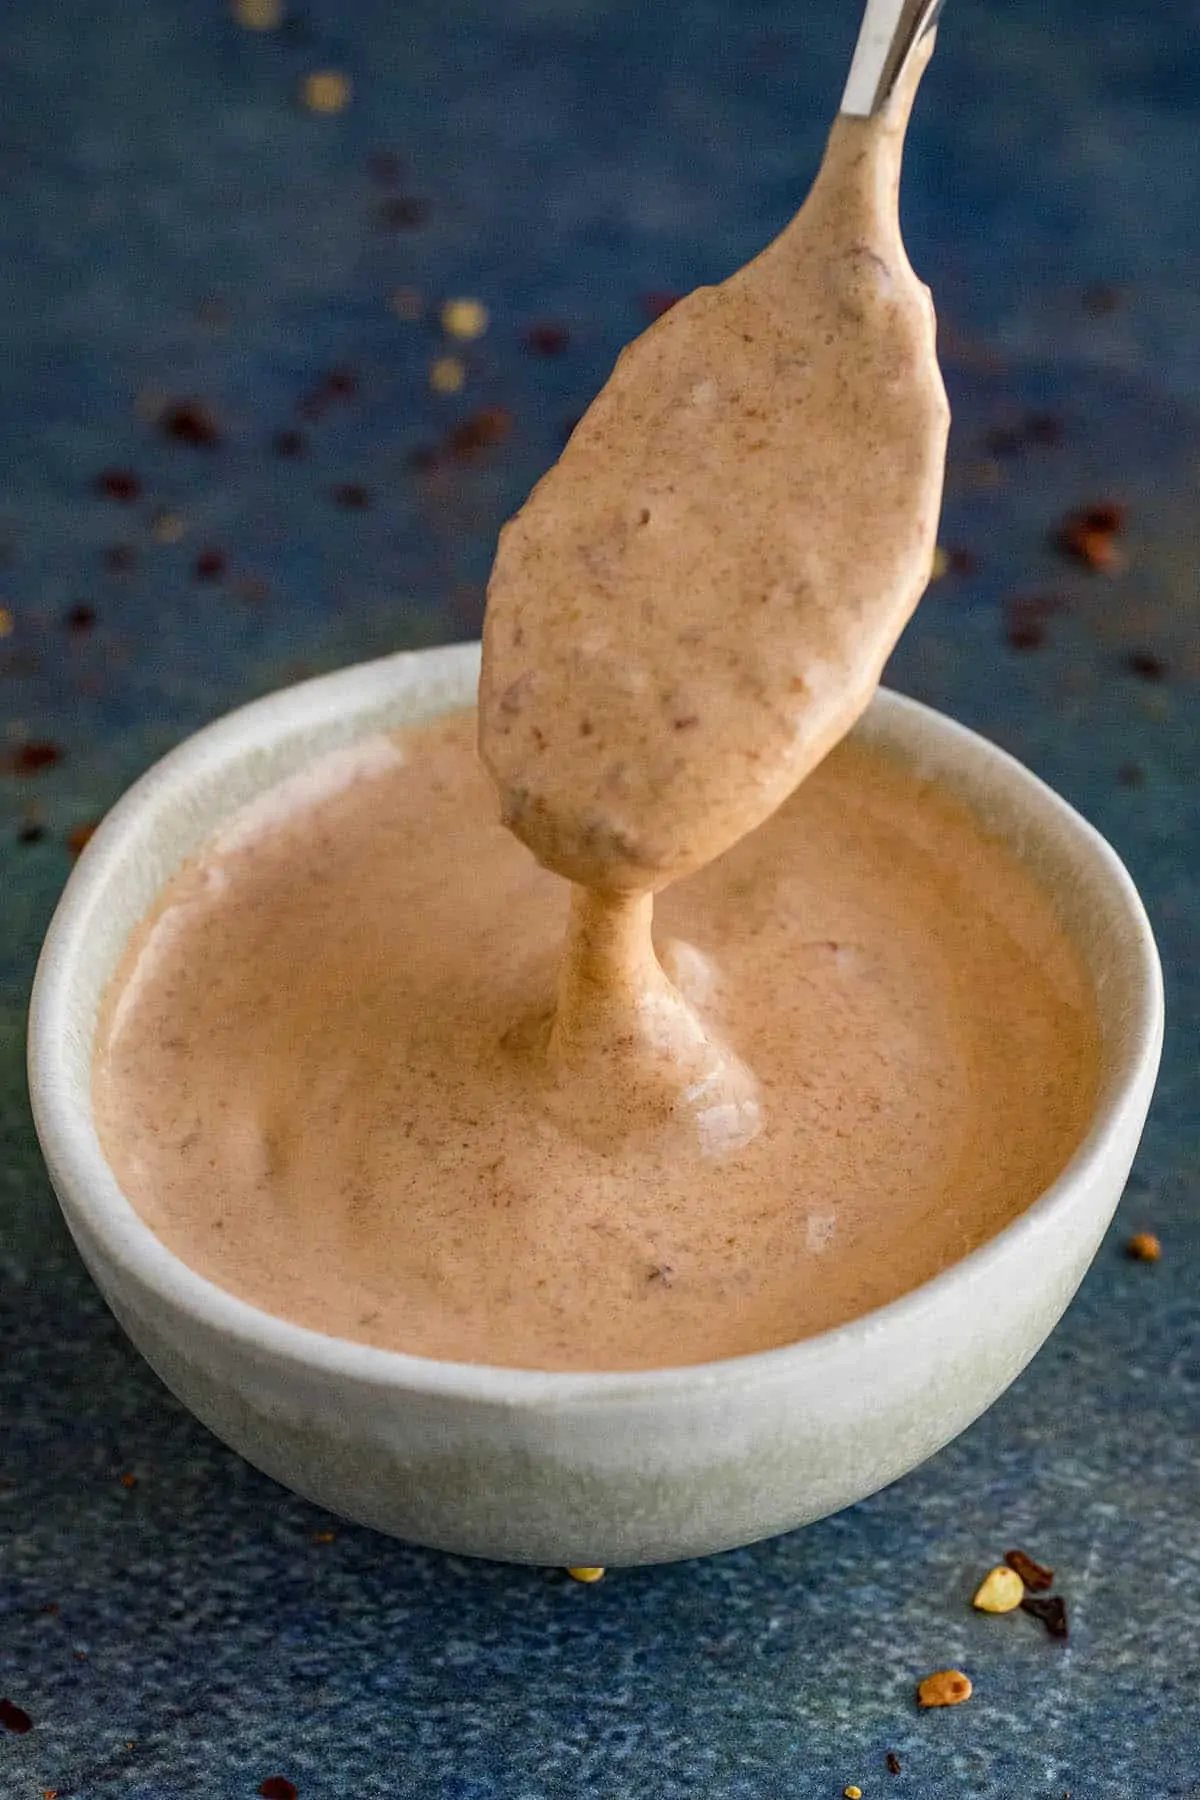 Creamy Chipotle Mayo dripping from a spoon.